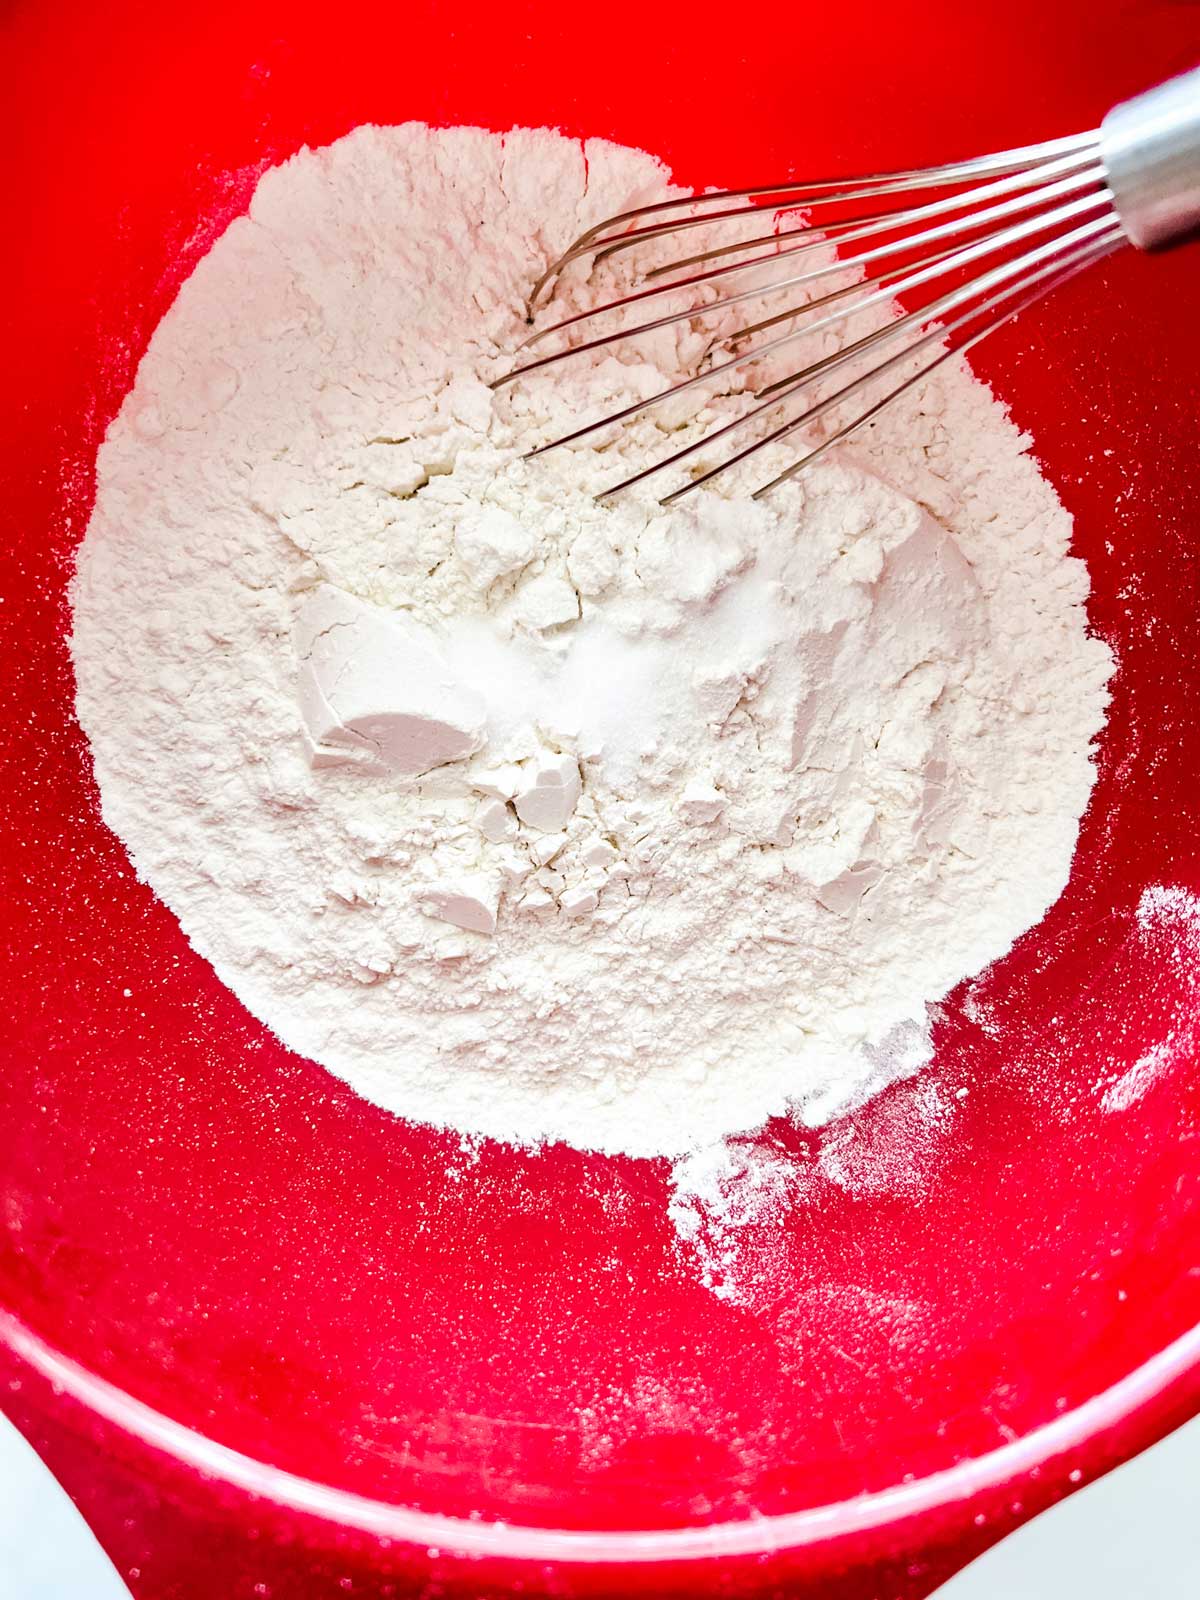 Dry cookie ingredients being whisked together in a red bowl.